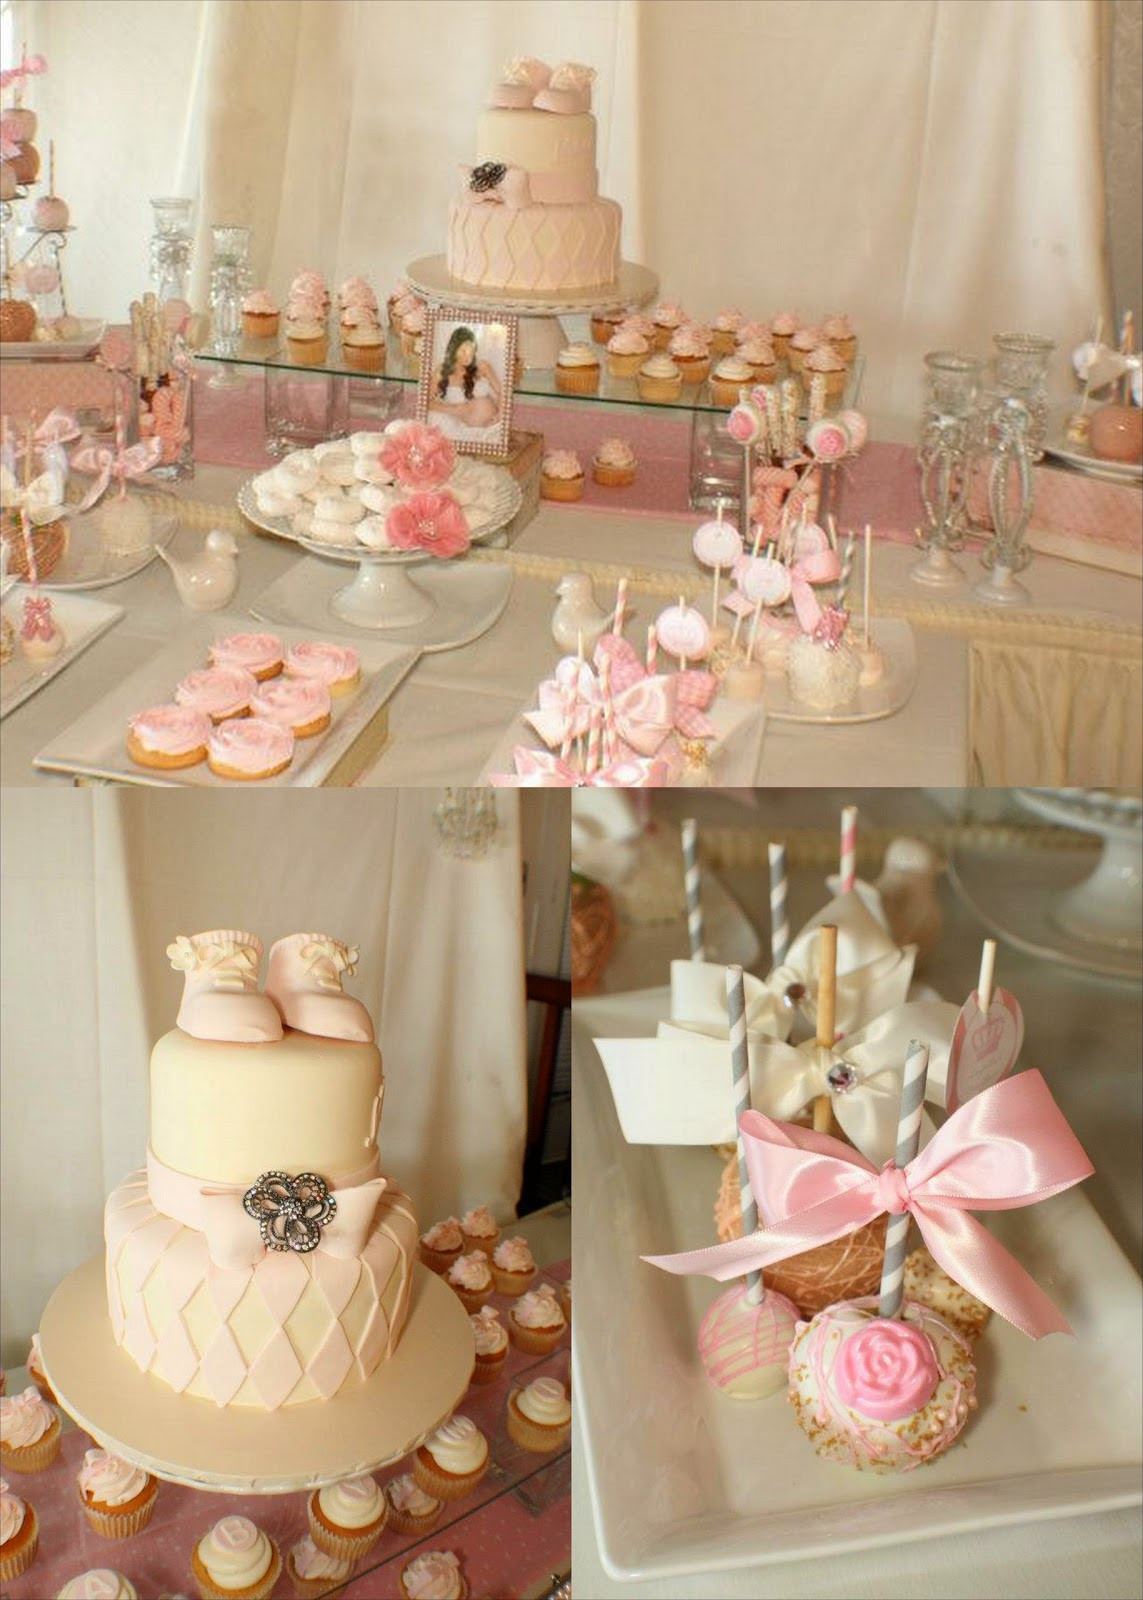 Baby Shower Decor Ideas
 MKR Creations Shabby Chic Baby Shower